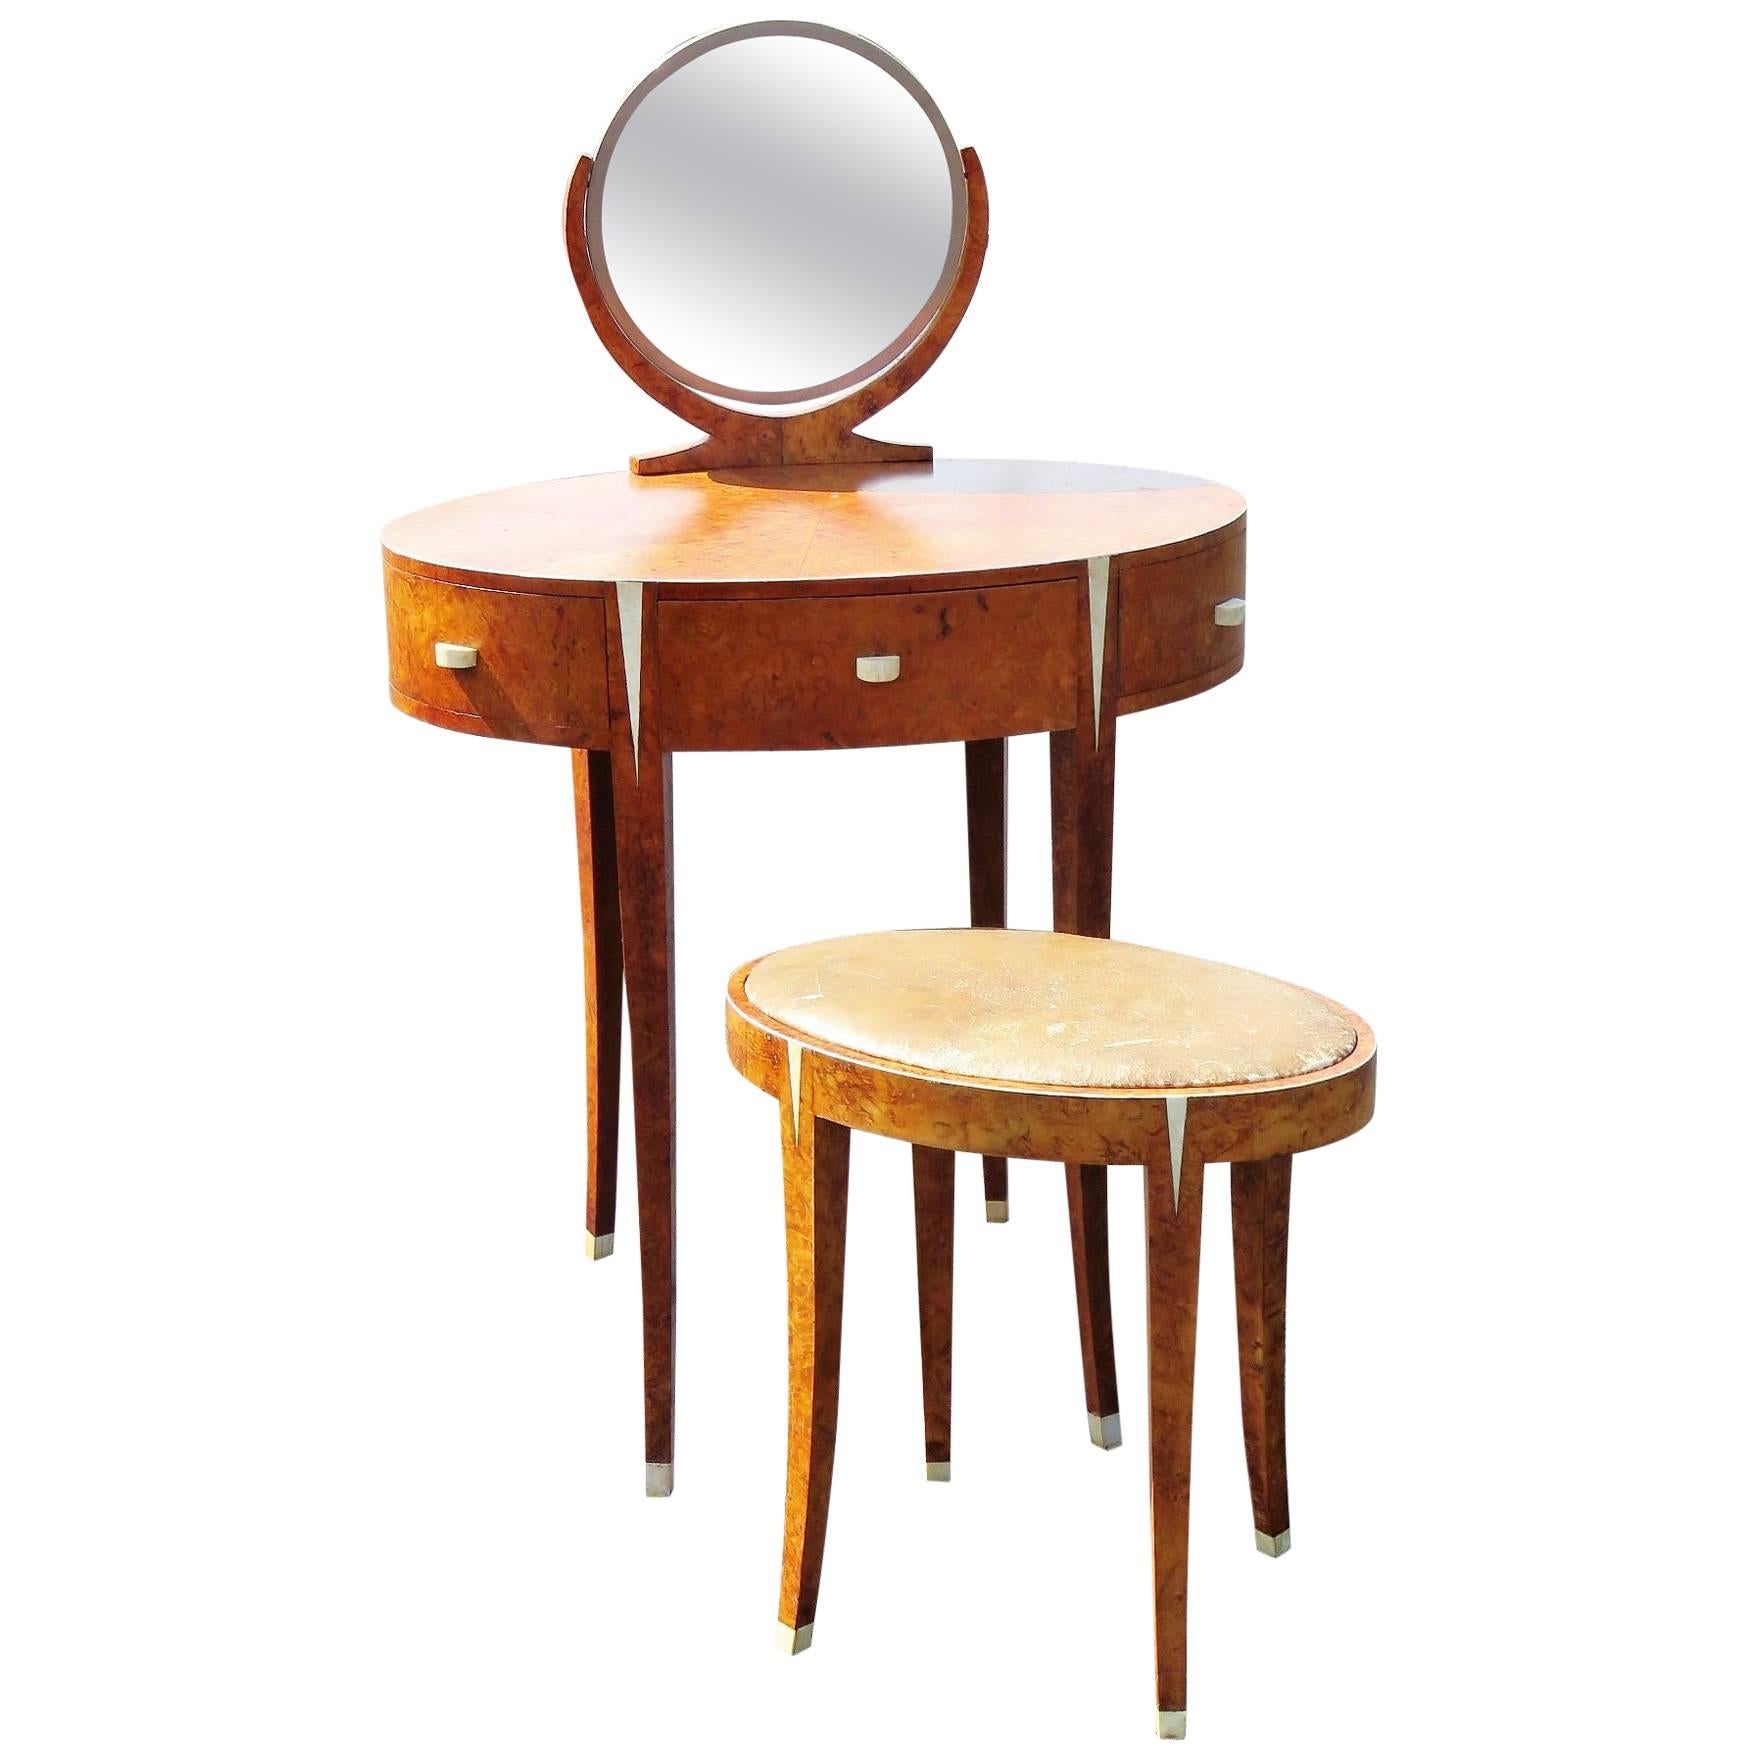 Deco Style Vanity & Bench Attributed to Ruhlmann